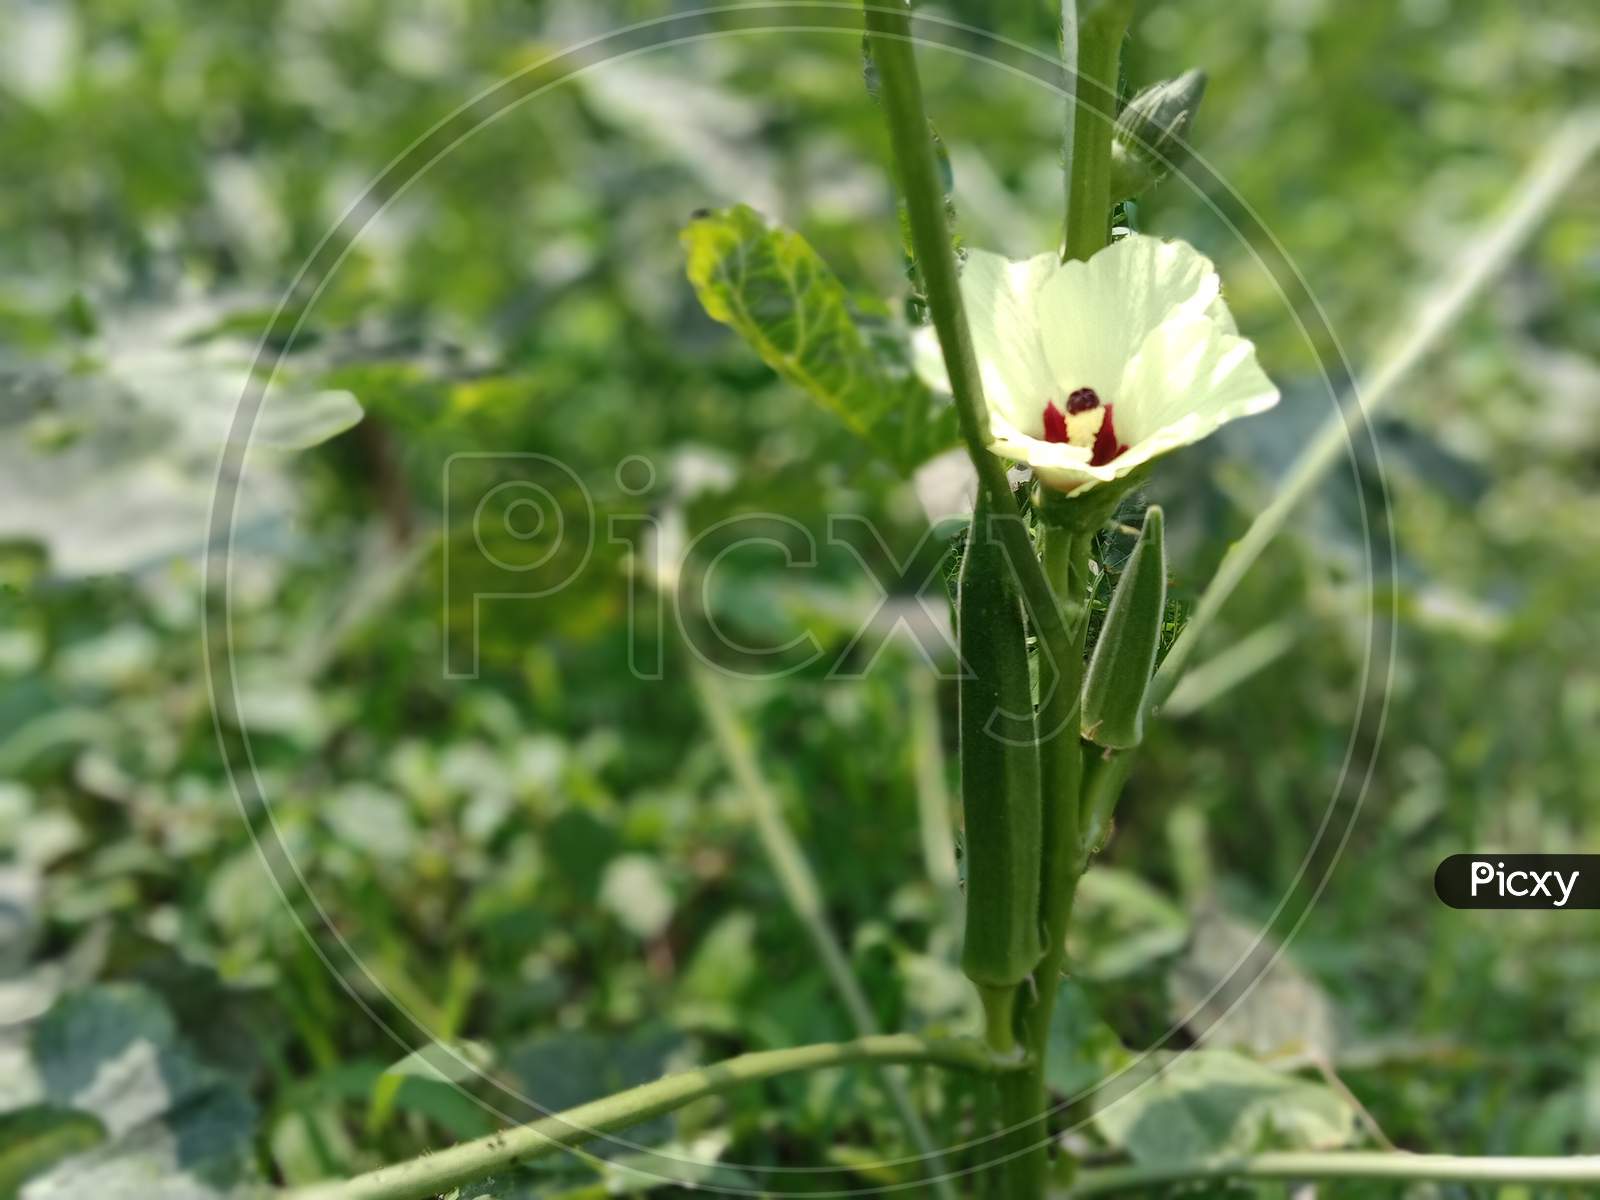 image of a healthy and fresh vegetable called as lady finger.